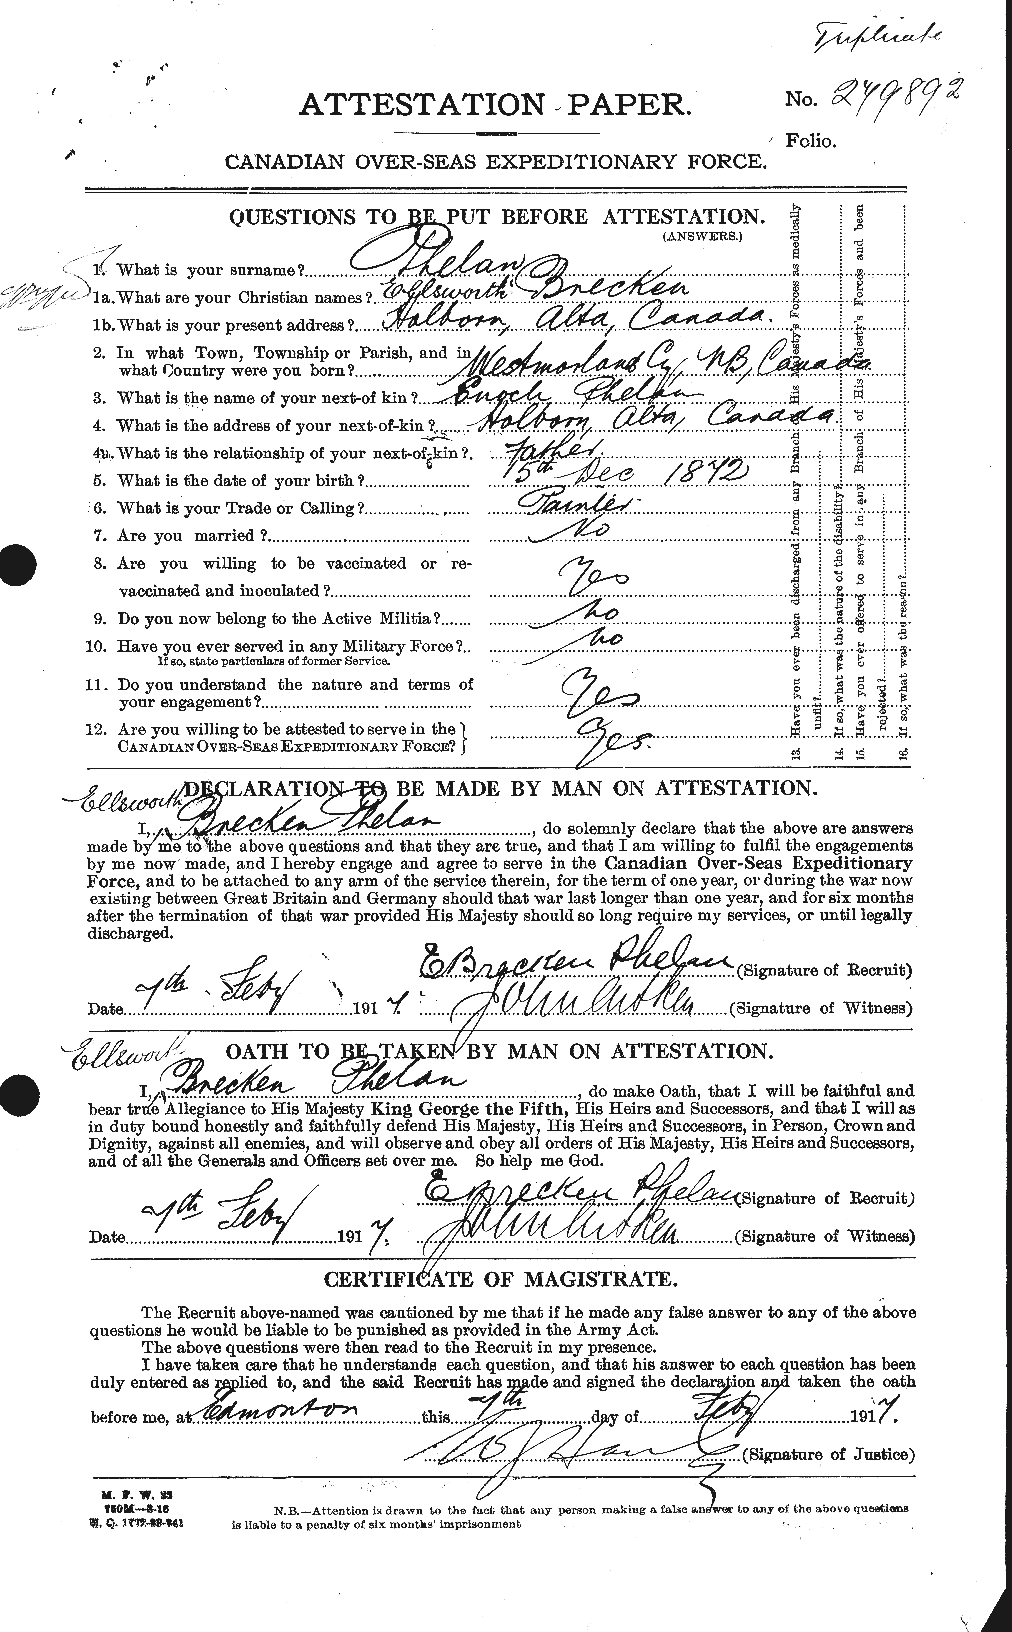 Personnel Records of the First World War - CEF 576943a